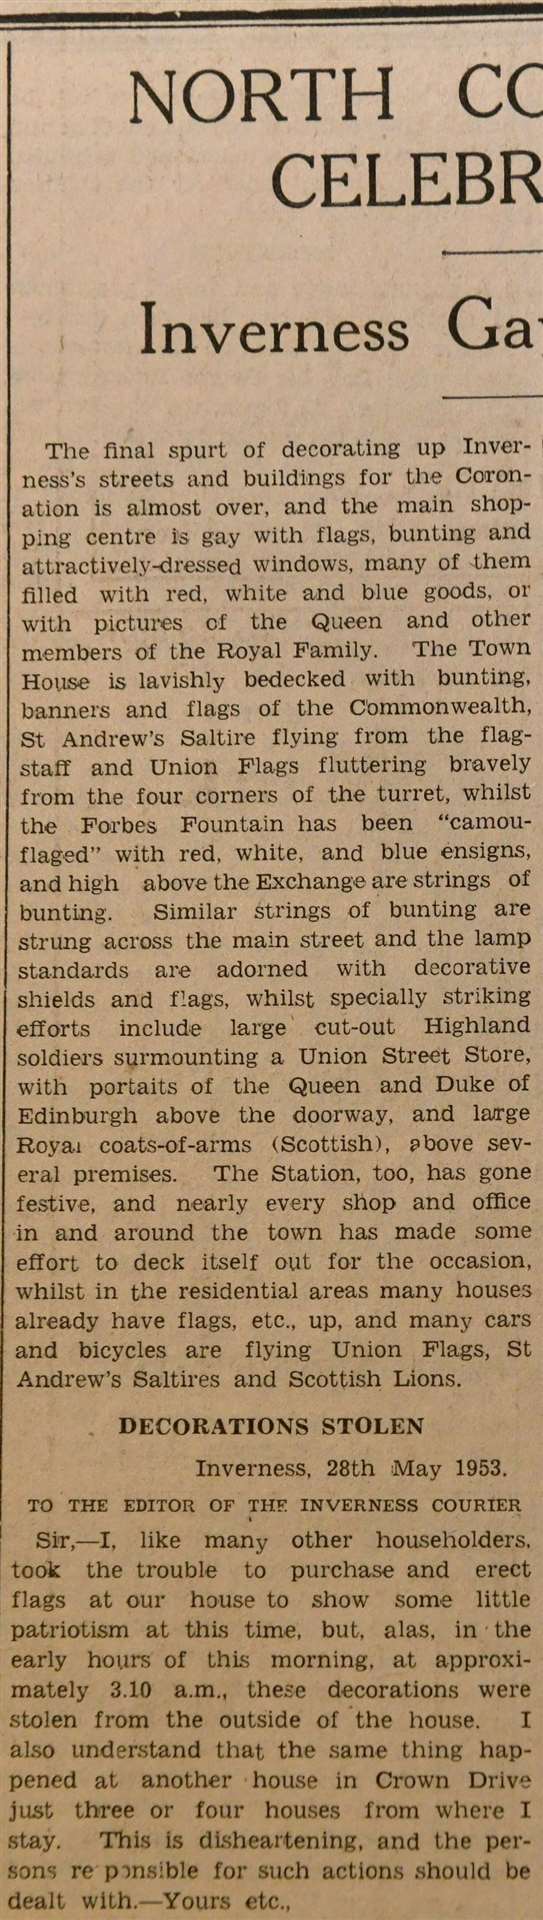 Inverness Courier coronation coverage in 1953